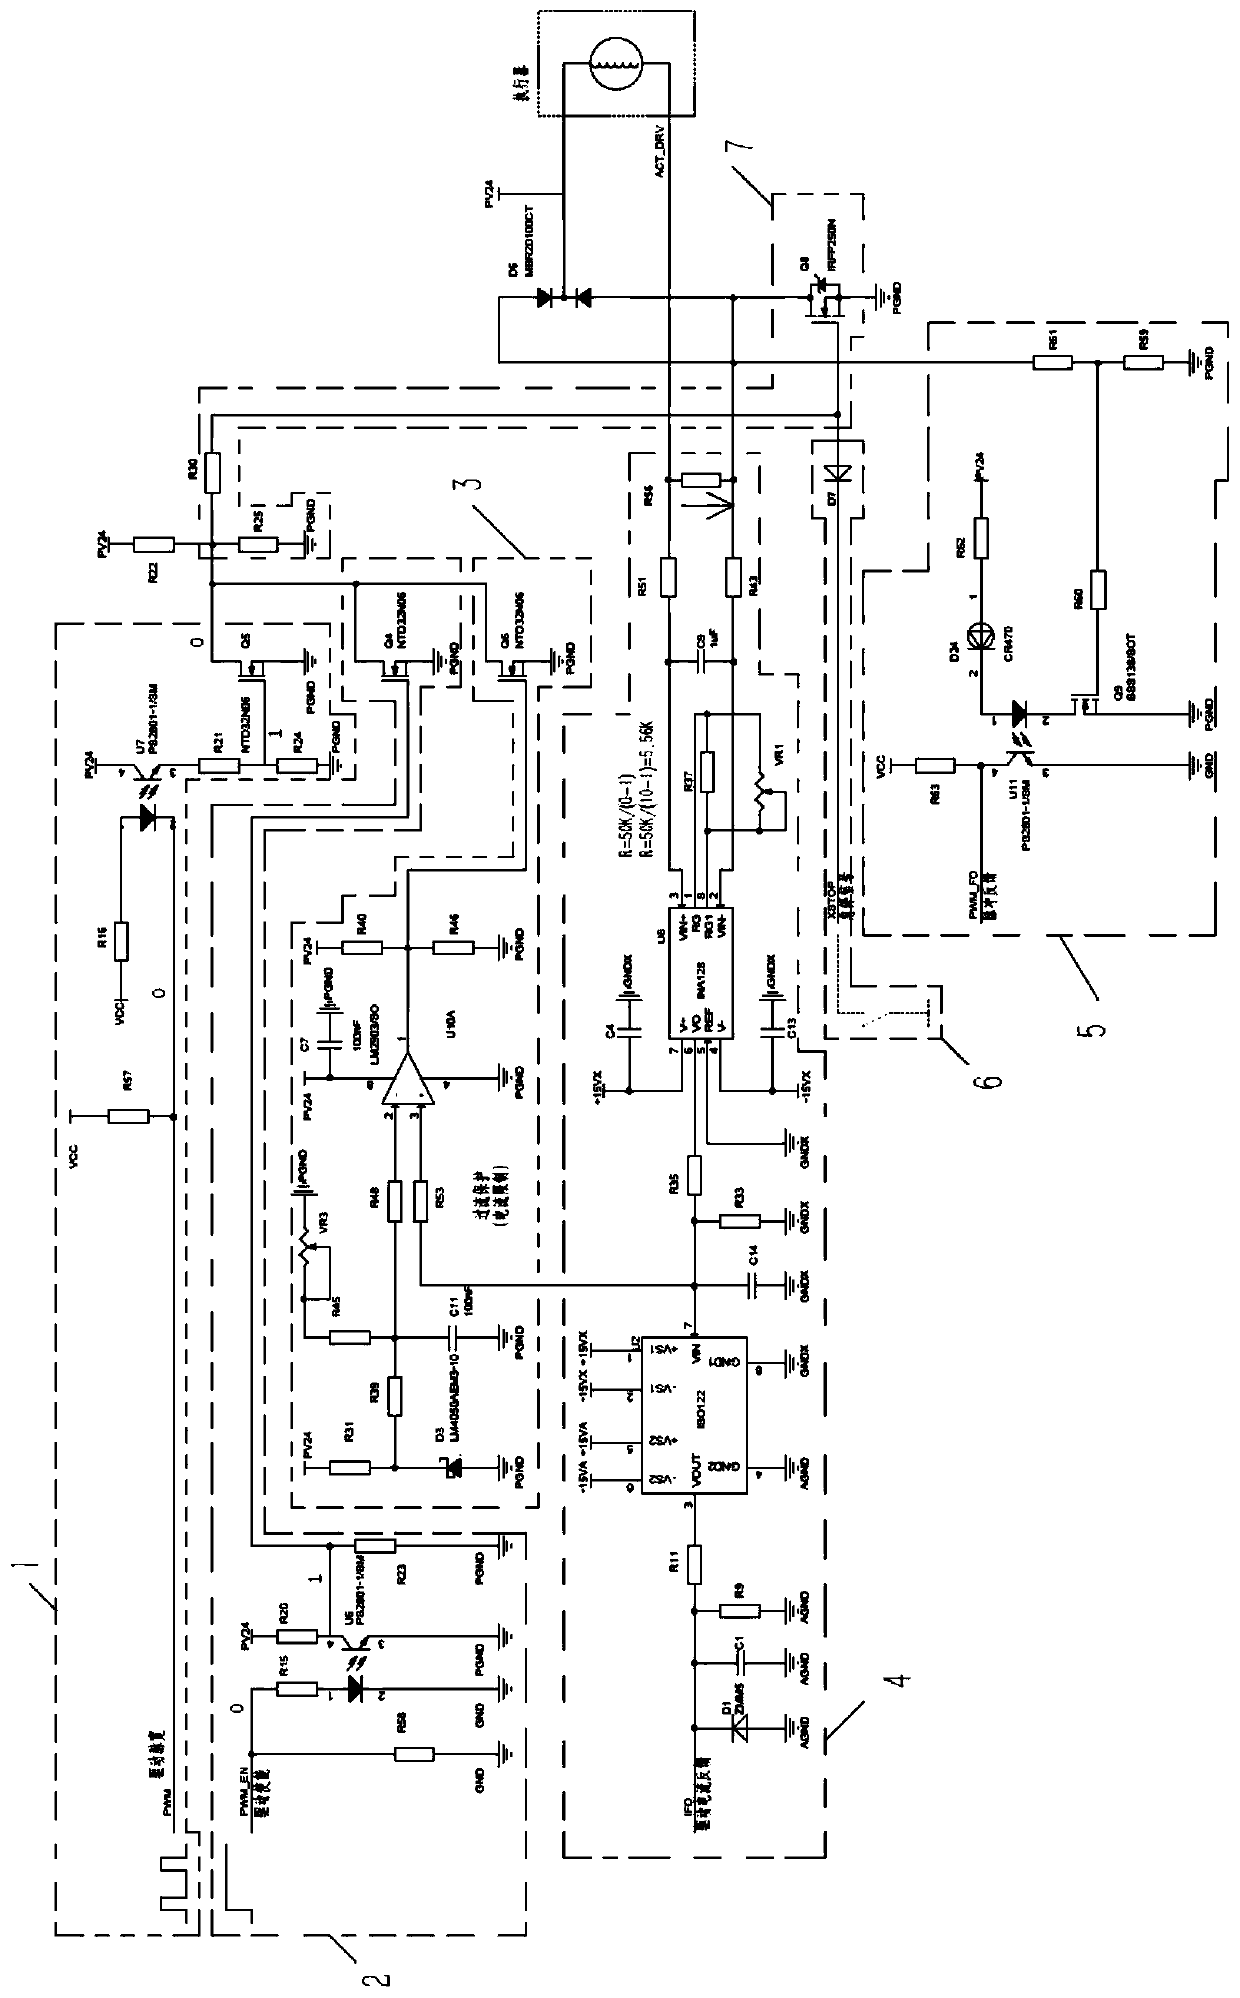 Driving circuit of diesel engine position control type actuator